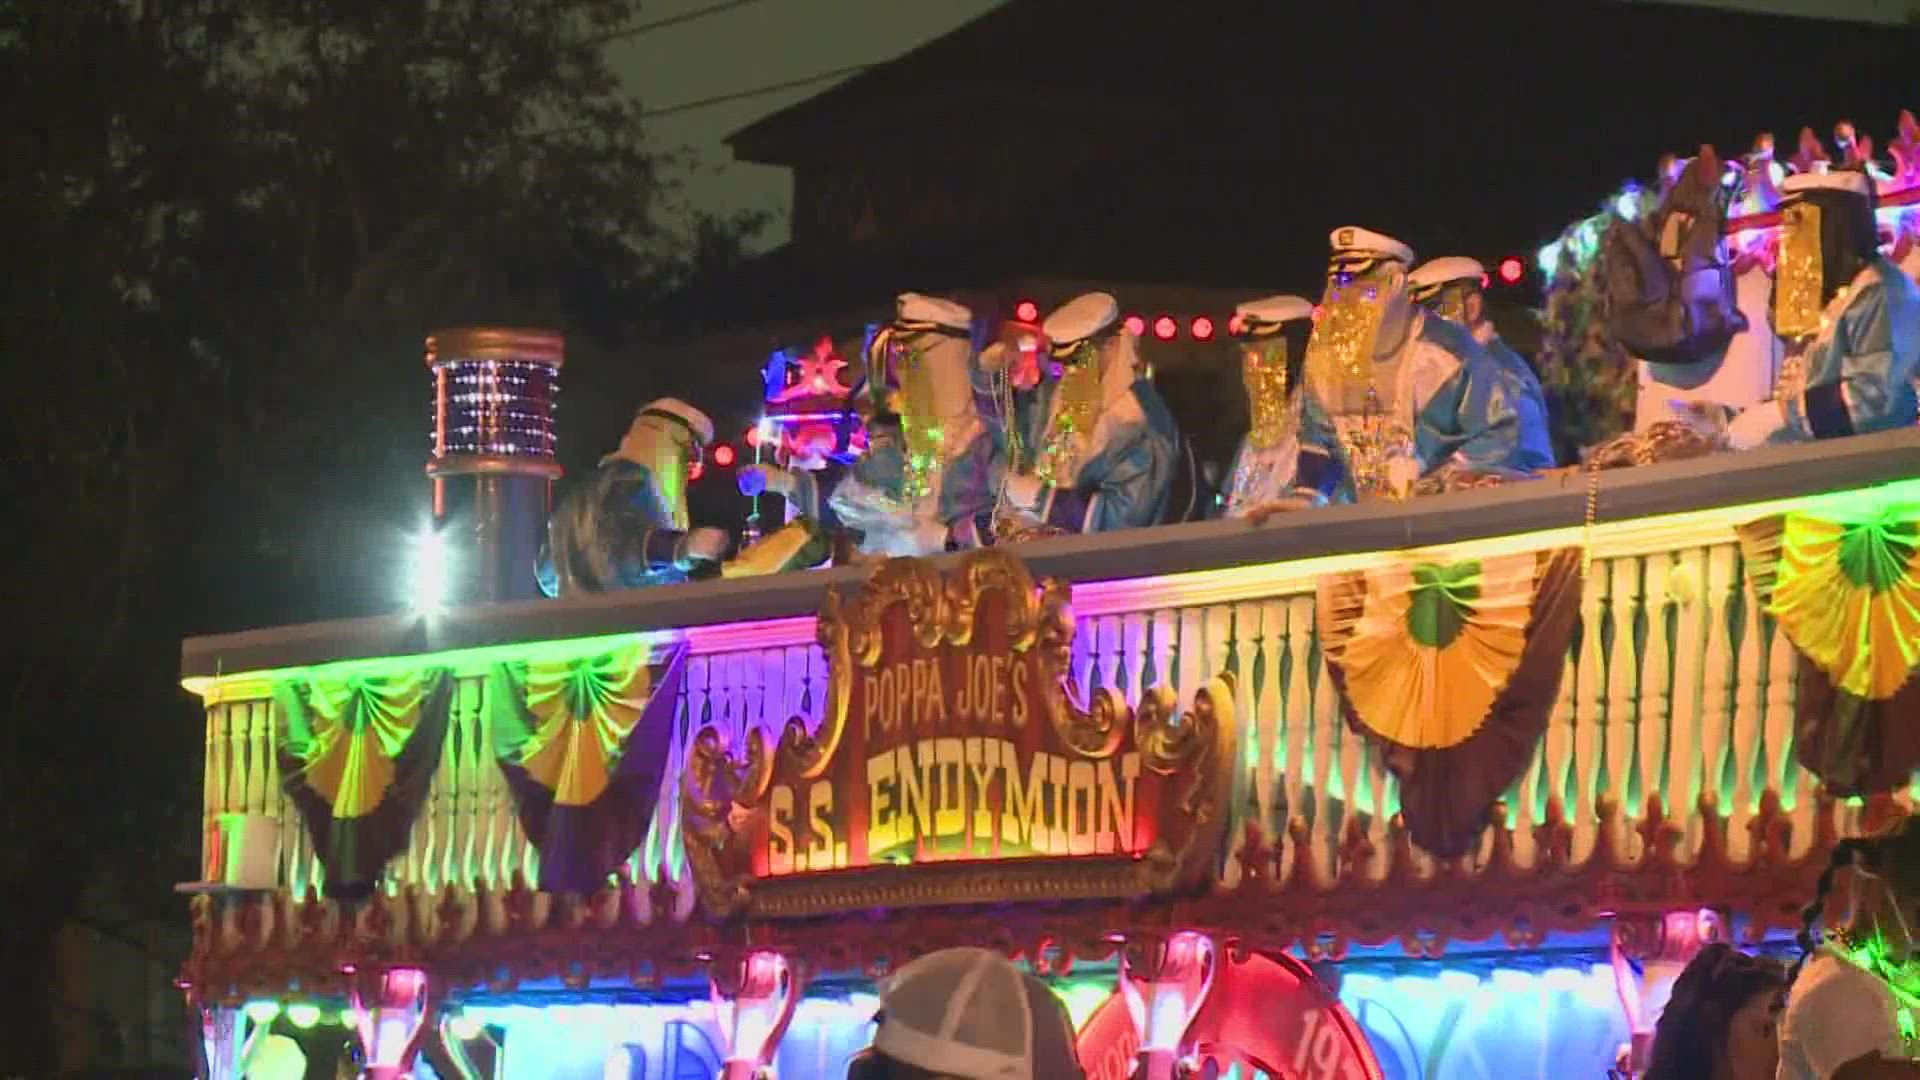 New Orleans' Mardi Gras krewes have more time to line up law enforcement to return to their longer, traditional routes.